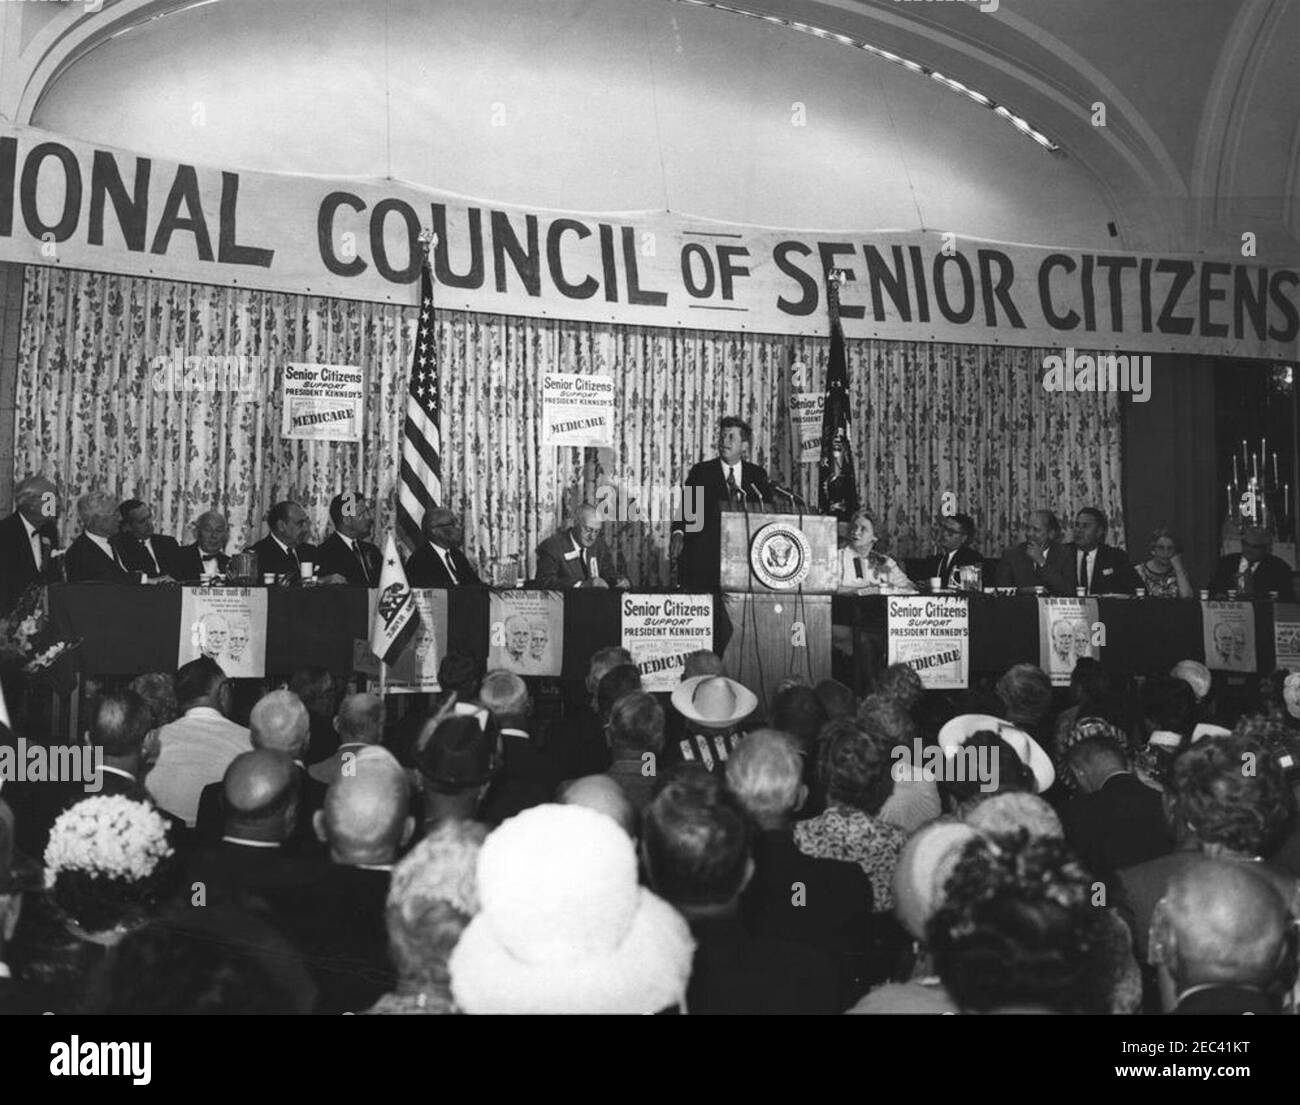 Address to the National Convention of the National Council of Senior Citizens, 11:47AM. President John F. Kennedy (at lectern) delivers an address to attendees of the National Convention of the National Council of Senior Citizens at the Willard Hotel, Washington D.C. On stage (L-R): Council Vice President, Burt Garnett; three unidentified; Secretary of the Department of Health, Education, and Welfare, Anthony J. Celebrezze; Senator Birch Evans Bayh, Jr. of Indiana; Director of Special Projects for the Council, Lawrence A. Oxley; Council Chairman, John Fitzpatrick; President Kennedy; two uniden Stock Photo